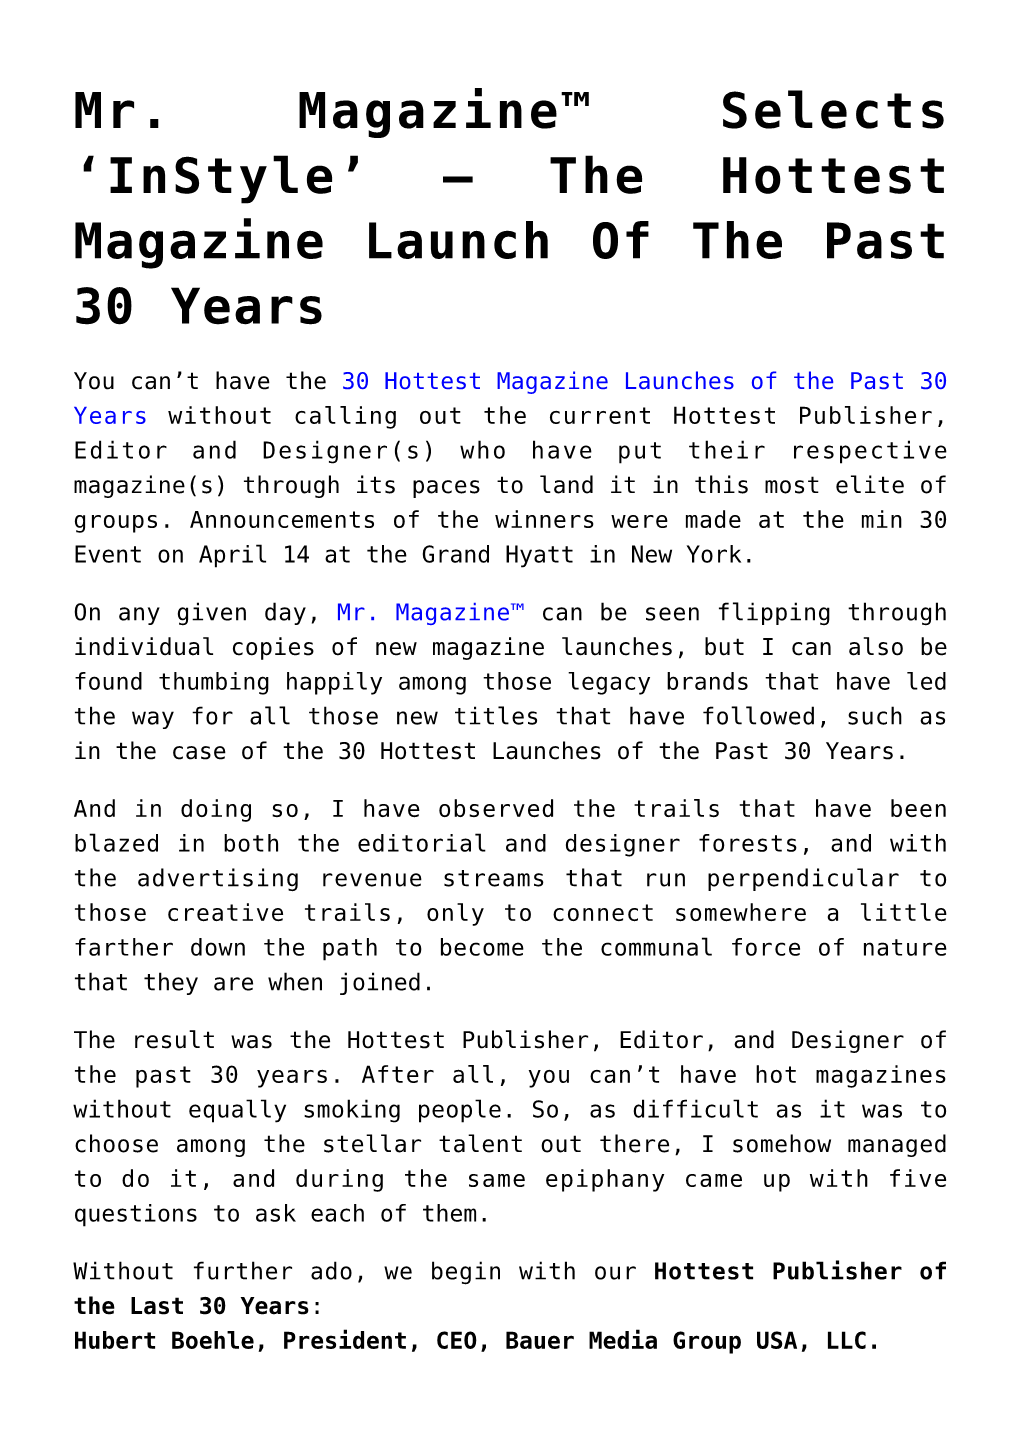 The Hottest Magazine Launch of the Past 30 Years